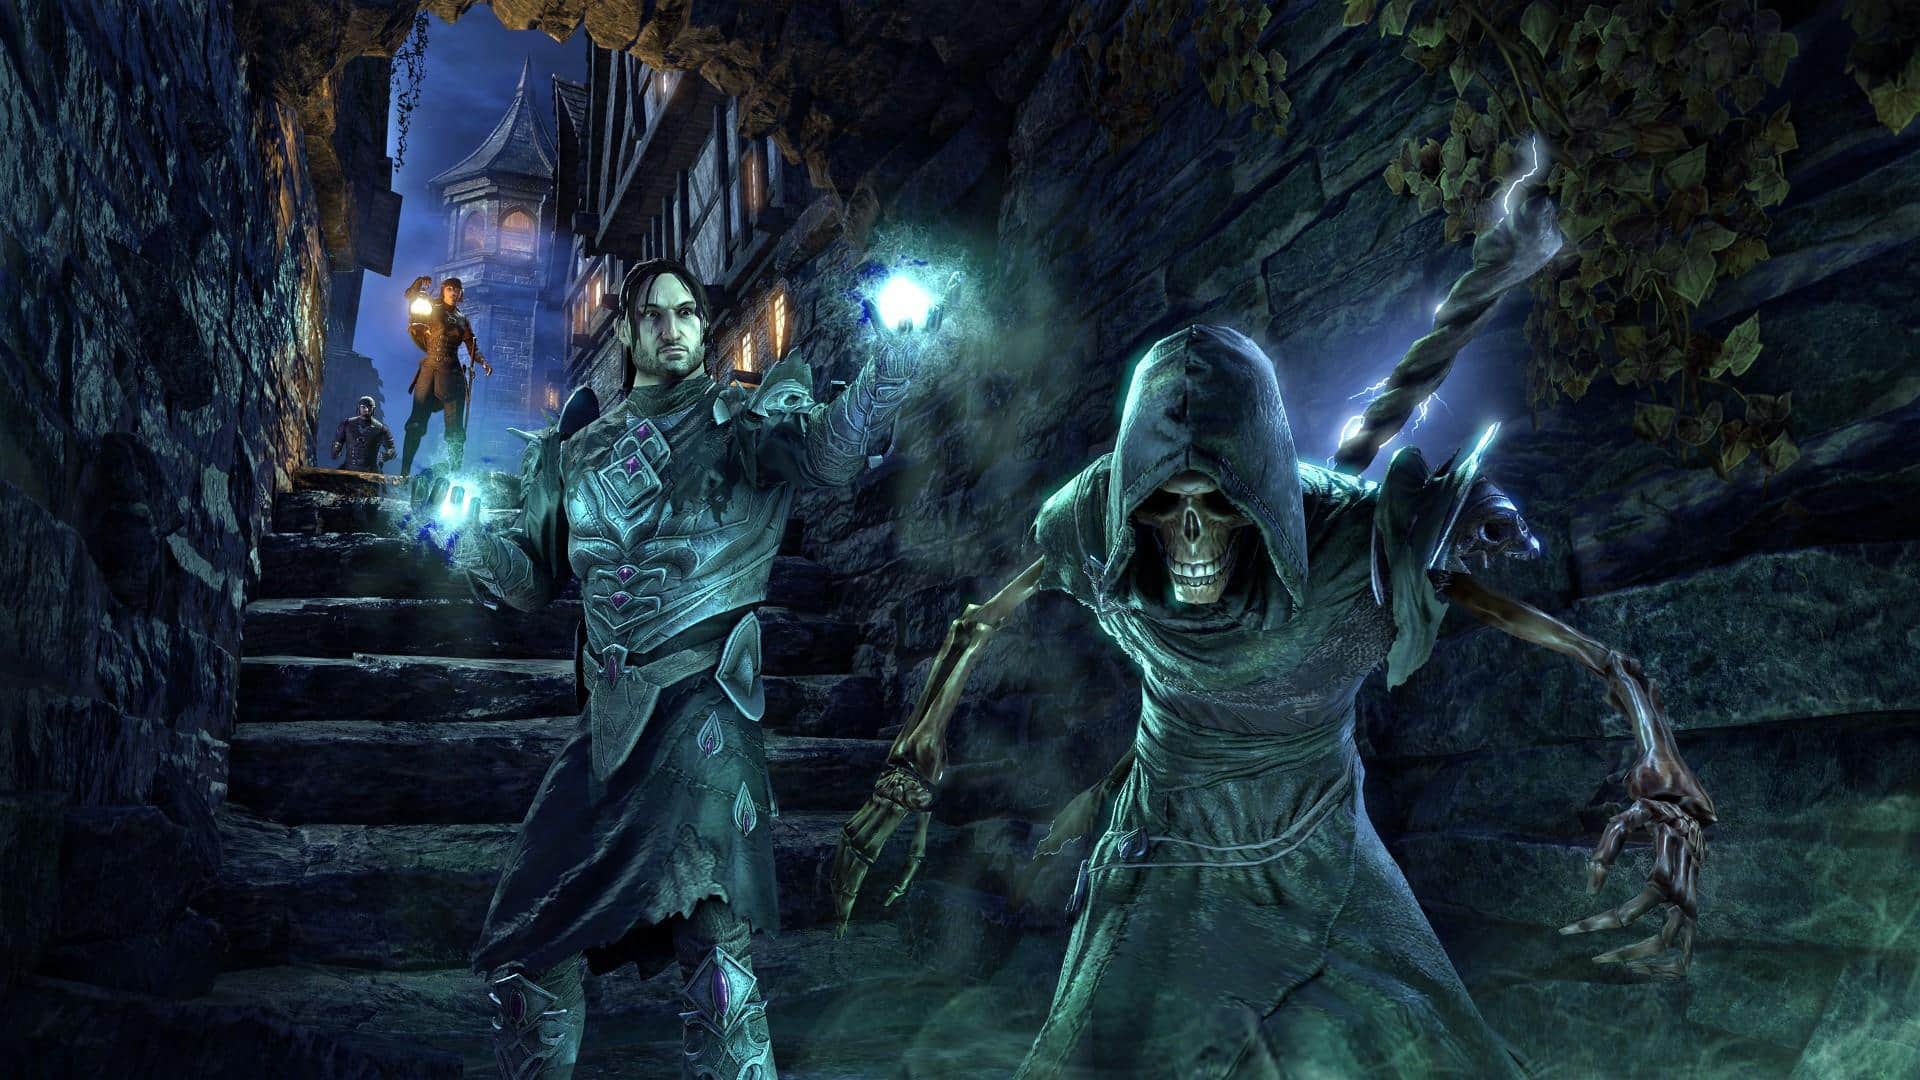 ESO Necromancer build guide ESO builds for the new Elsweyr class